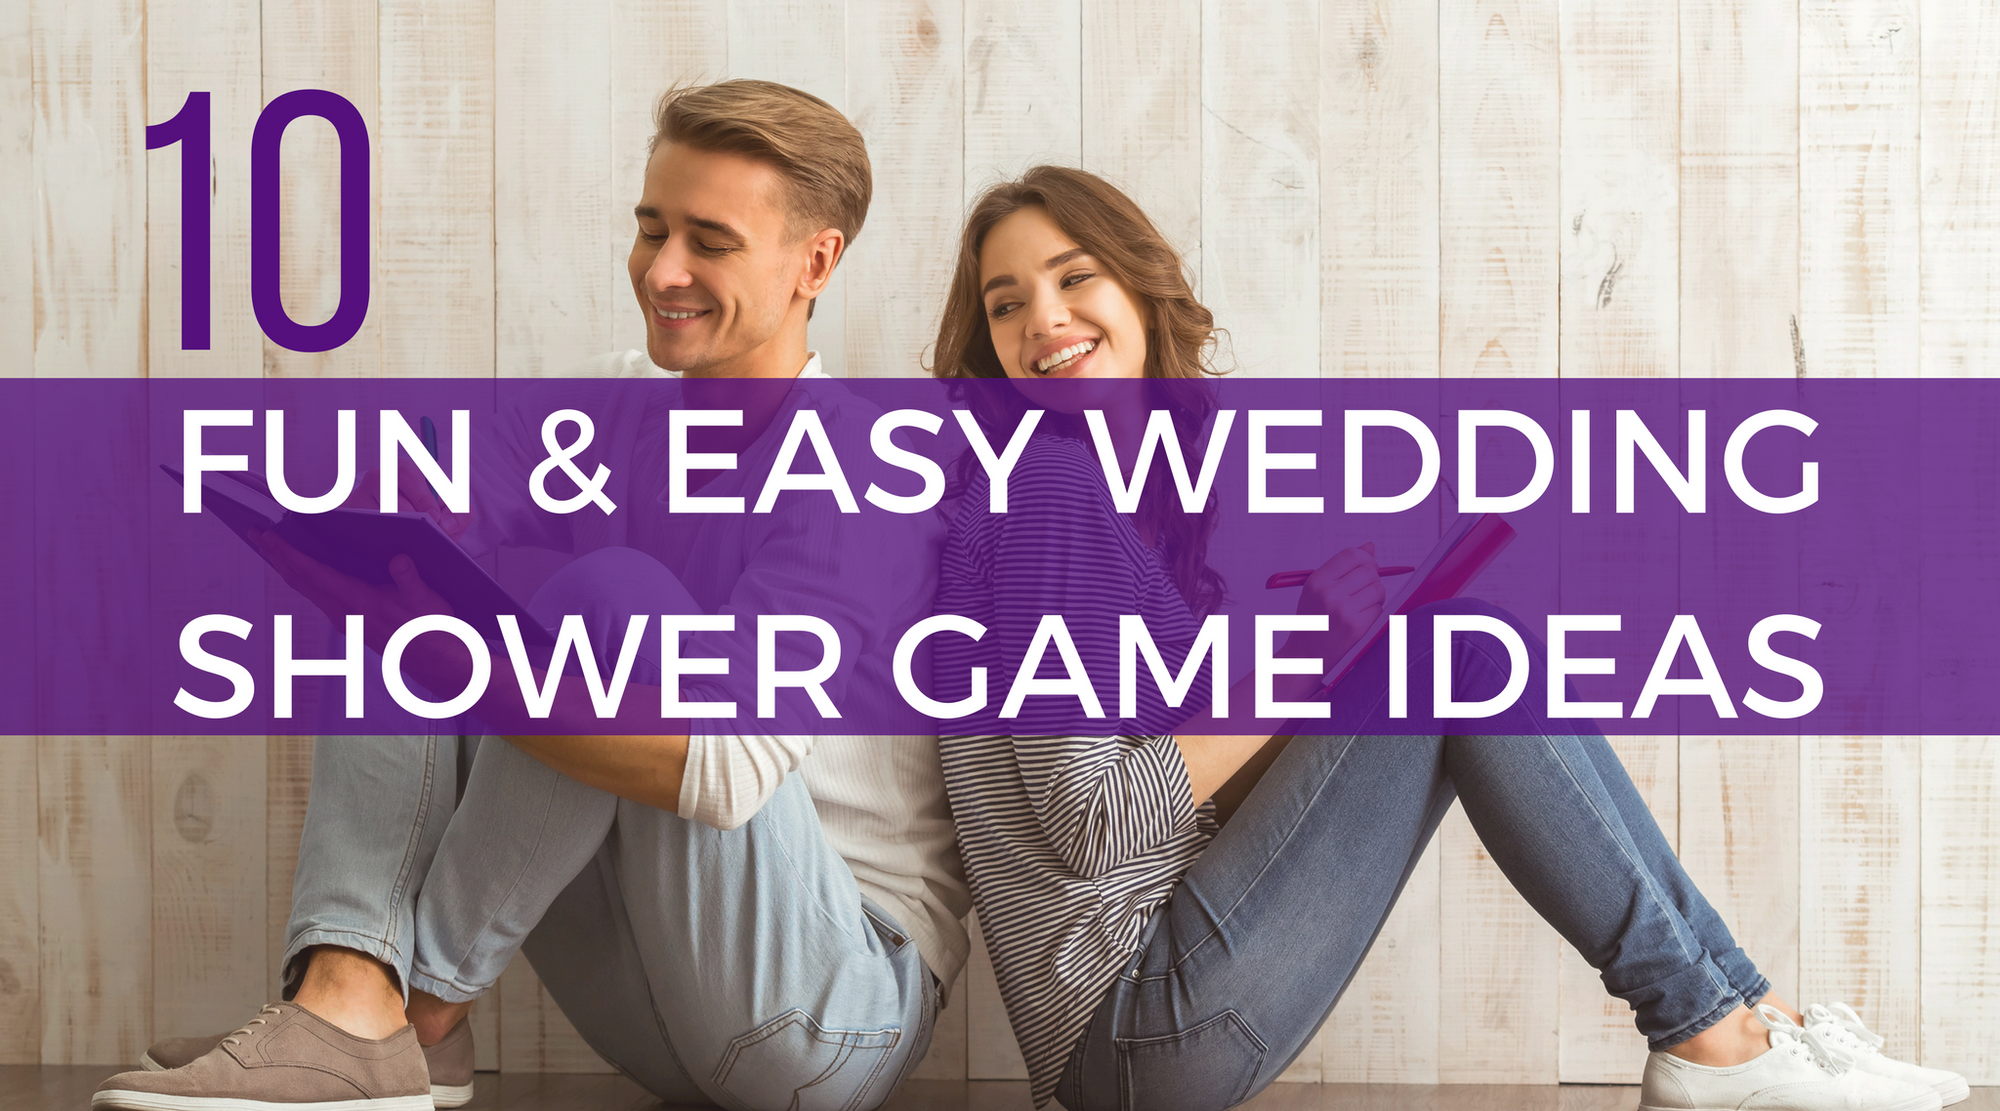 How to Host a Coed Wedding Shower: 10 Fun Game Ideas | Planning a wedding shower can be a tricky task. Here are the top 10 best interactive wedding shower game ideas you can use to add fun and lasting memories to your next bridal shower. 